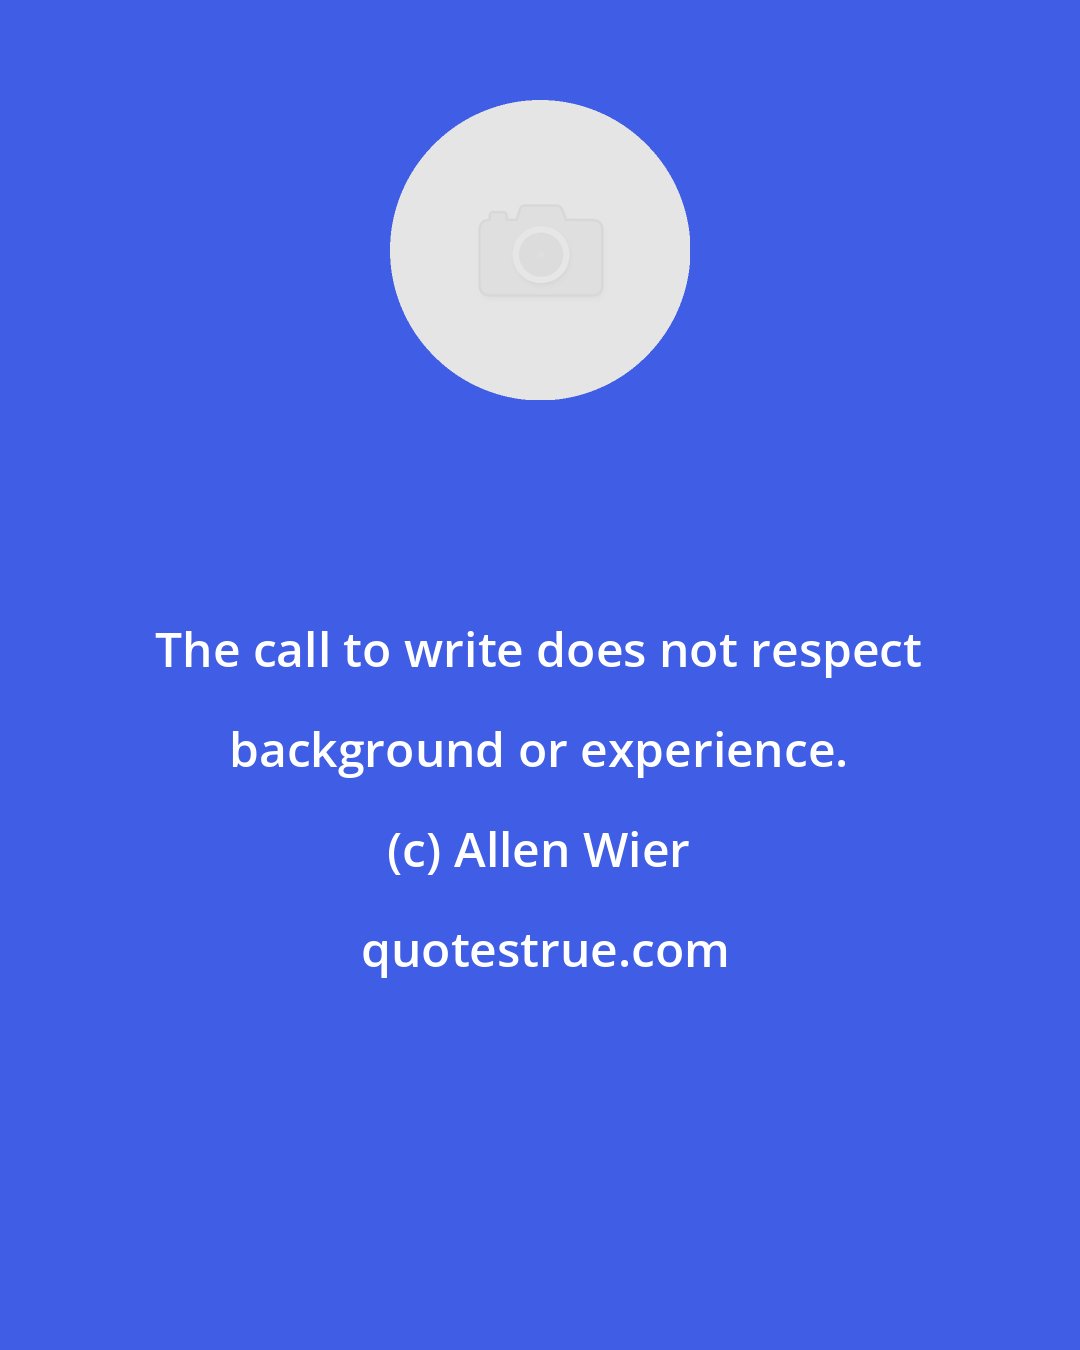 Allen Wier: The call to write does not respect background or experience.